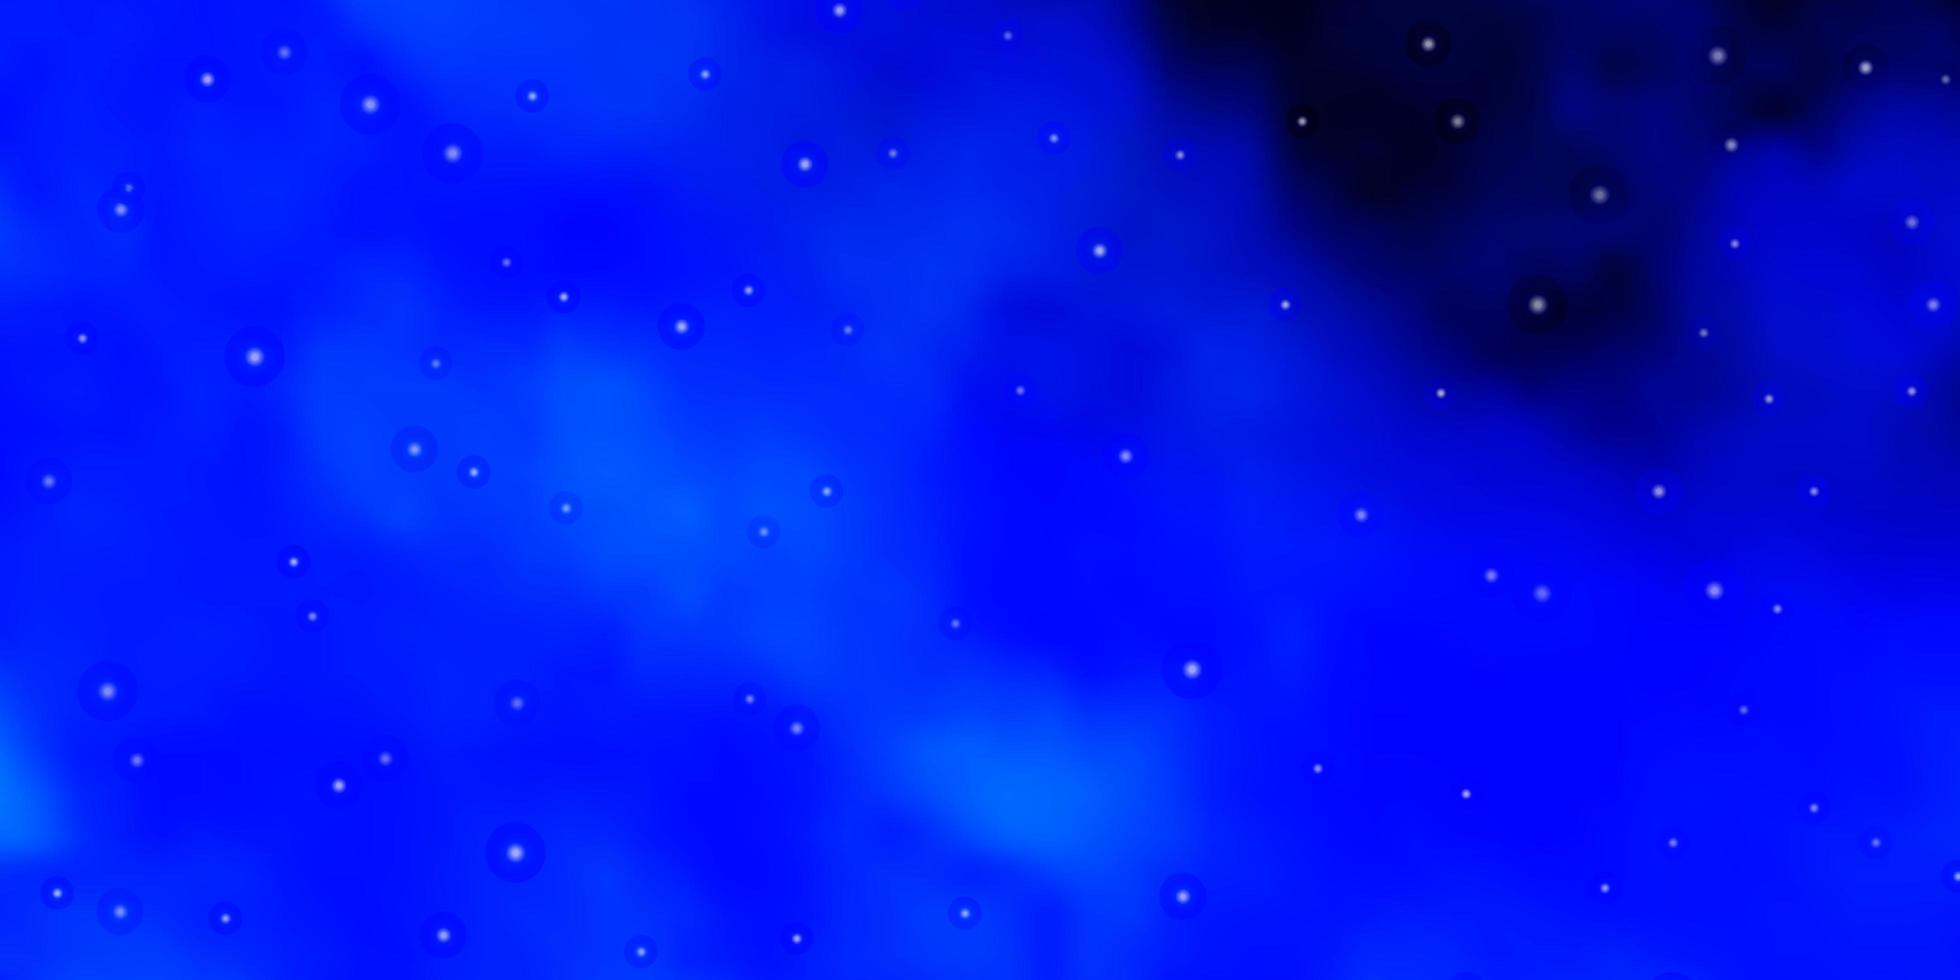 Dark BLUE vector background with colorful stars.